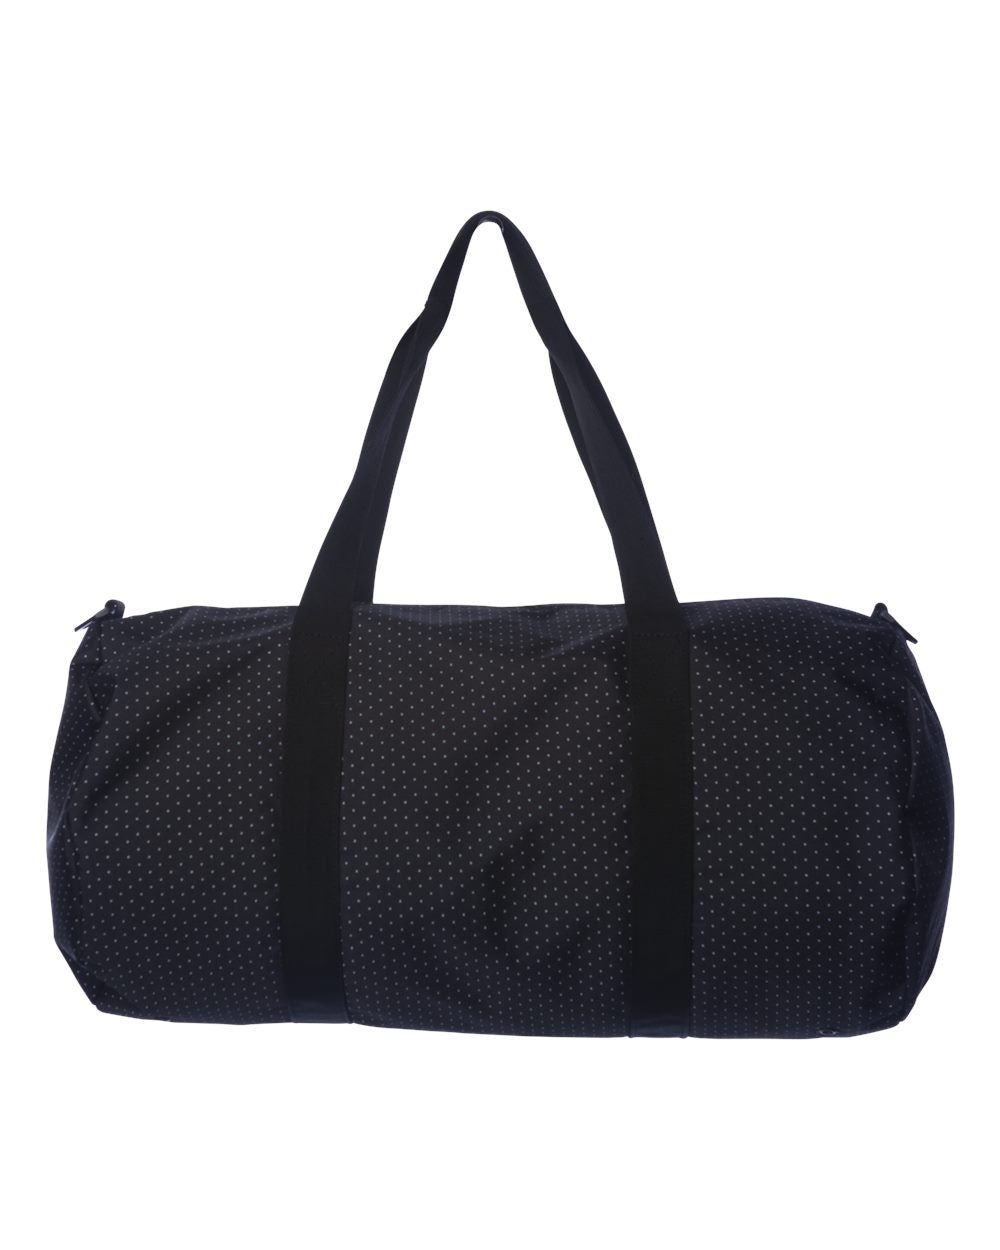 Independent Trading Co. - 29L Day Tripper Duffel Bag